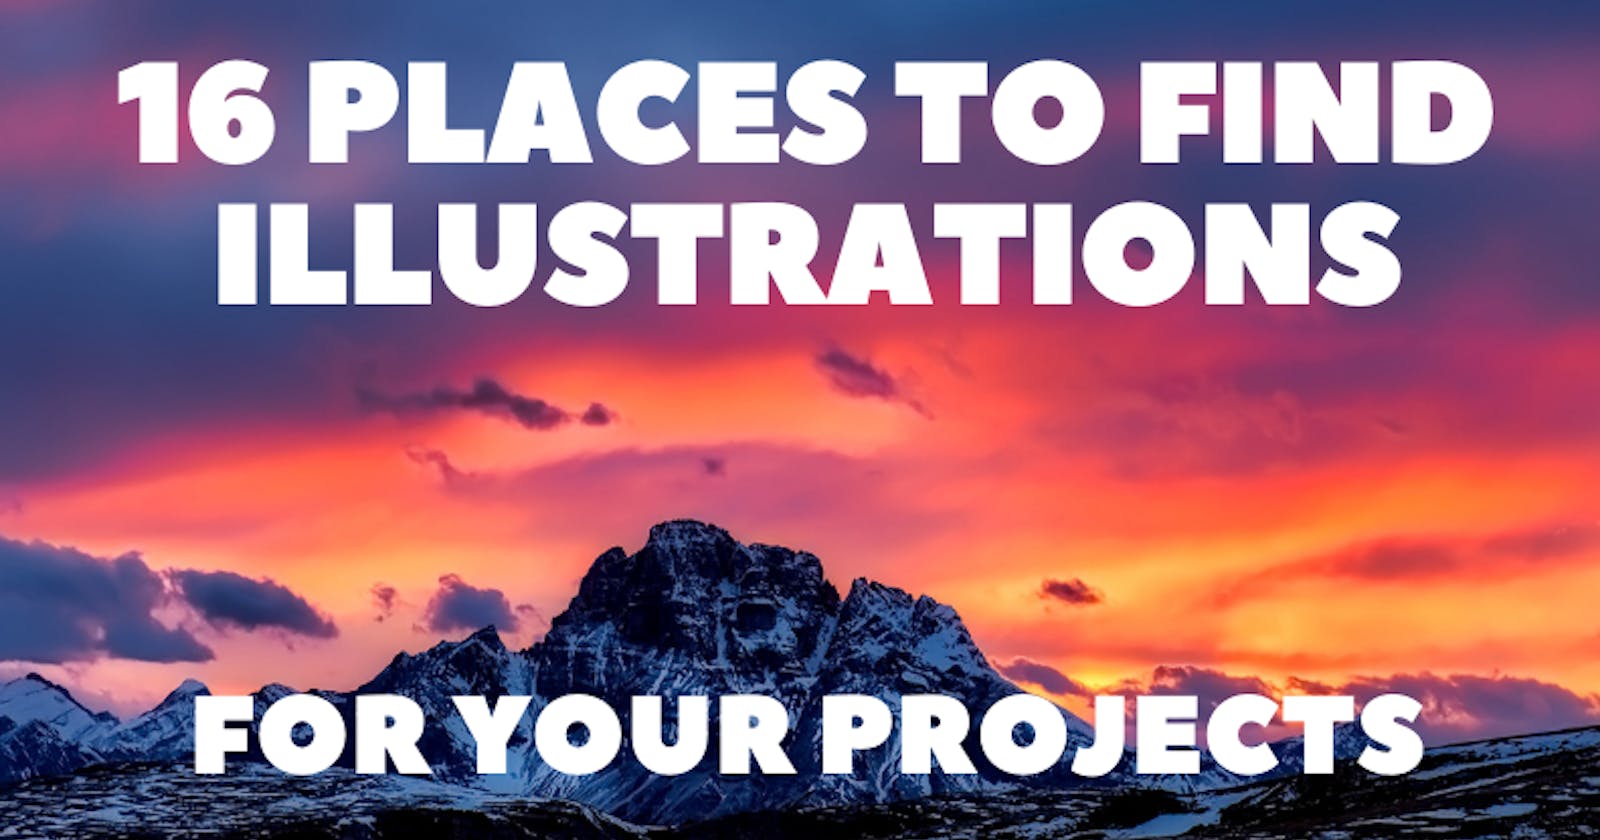 16 Places to Find Illustrations for Your Projects 📚🎨